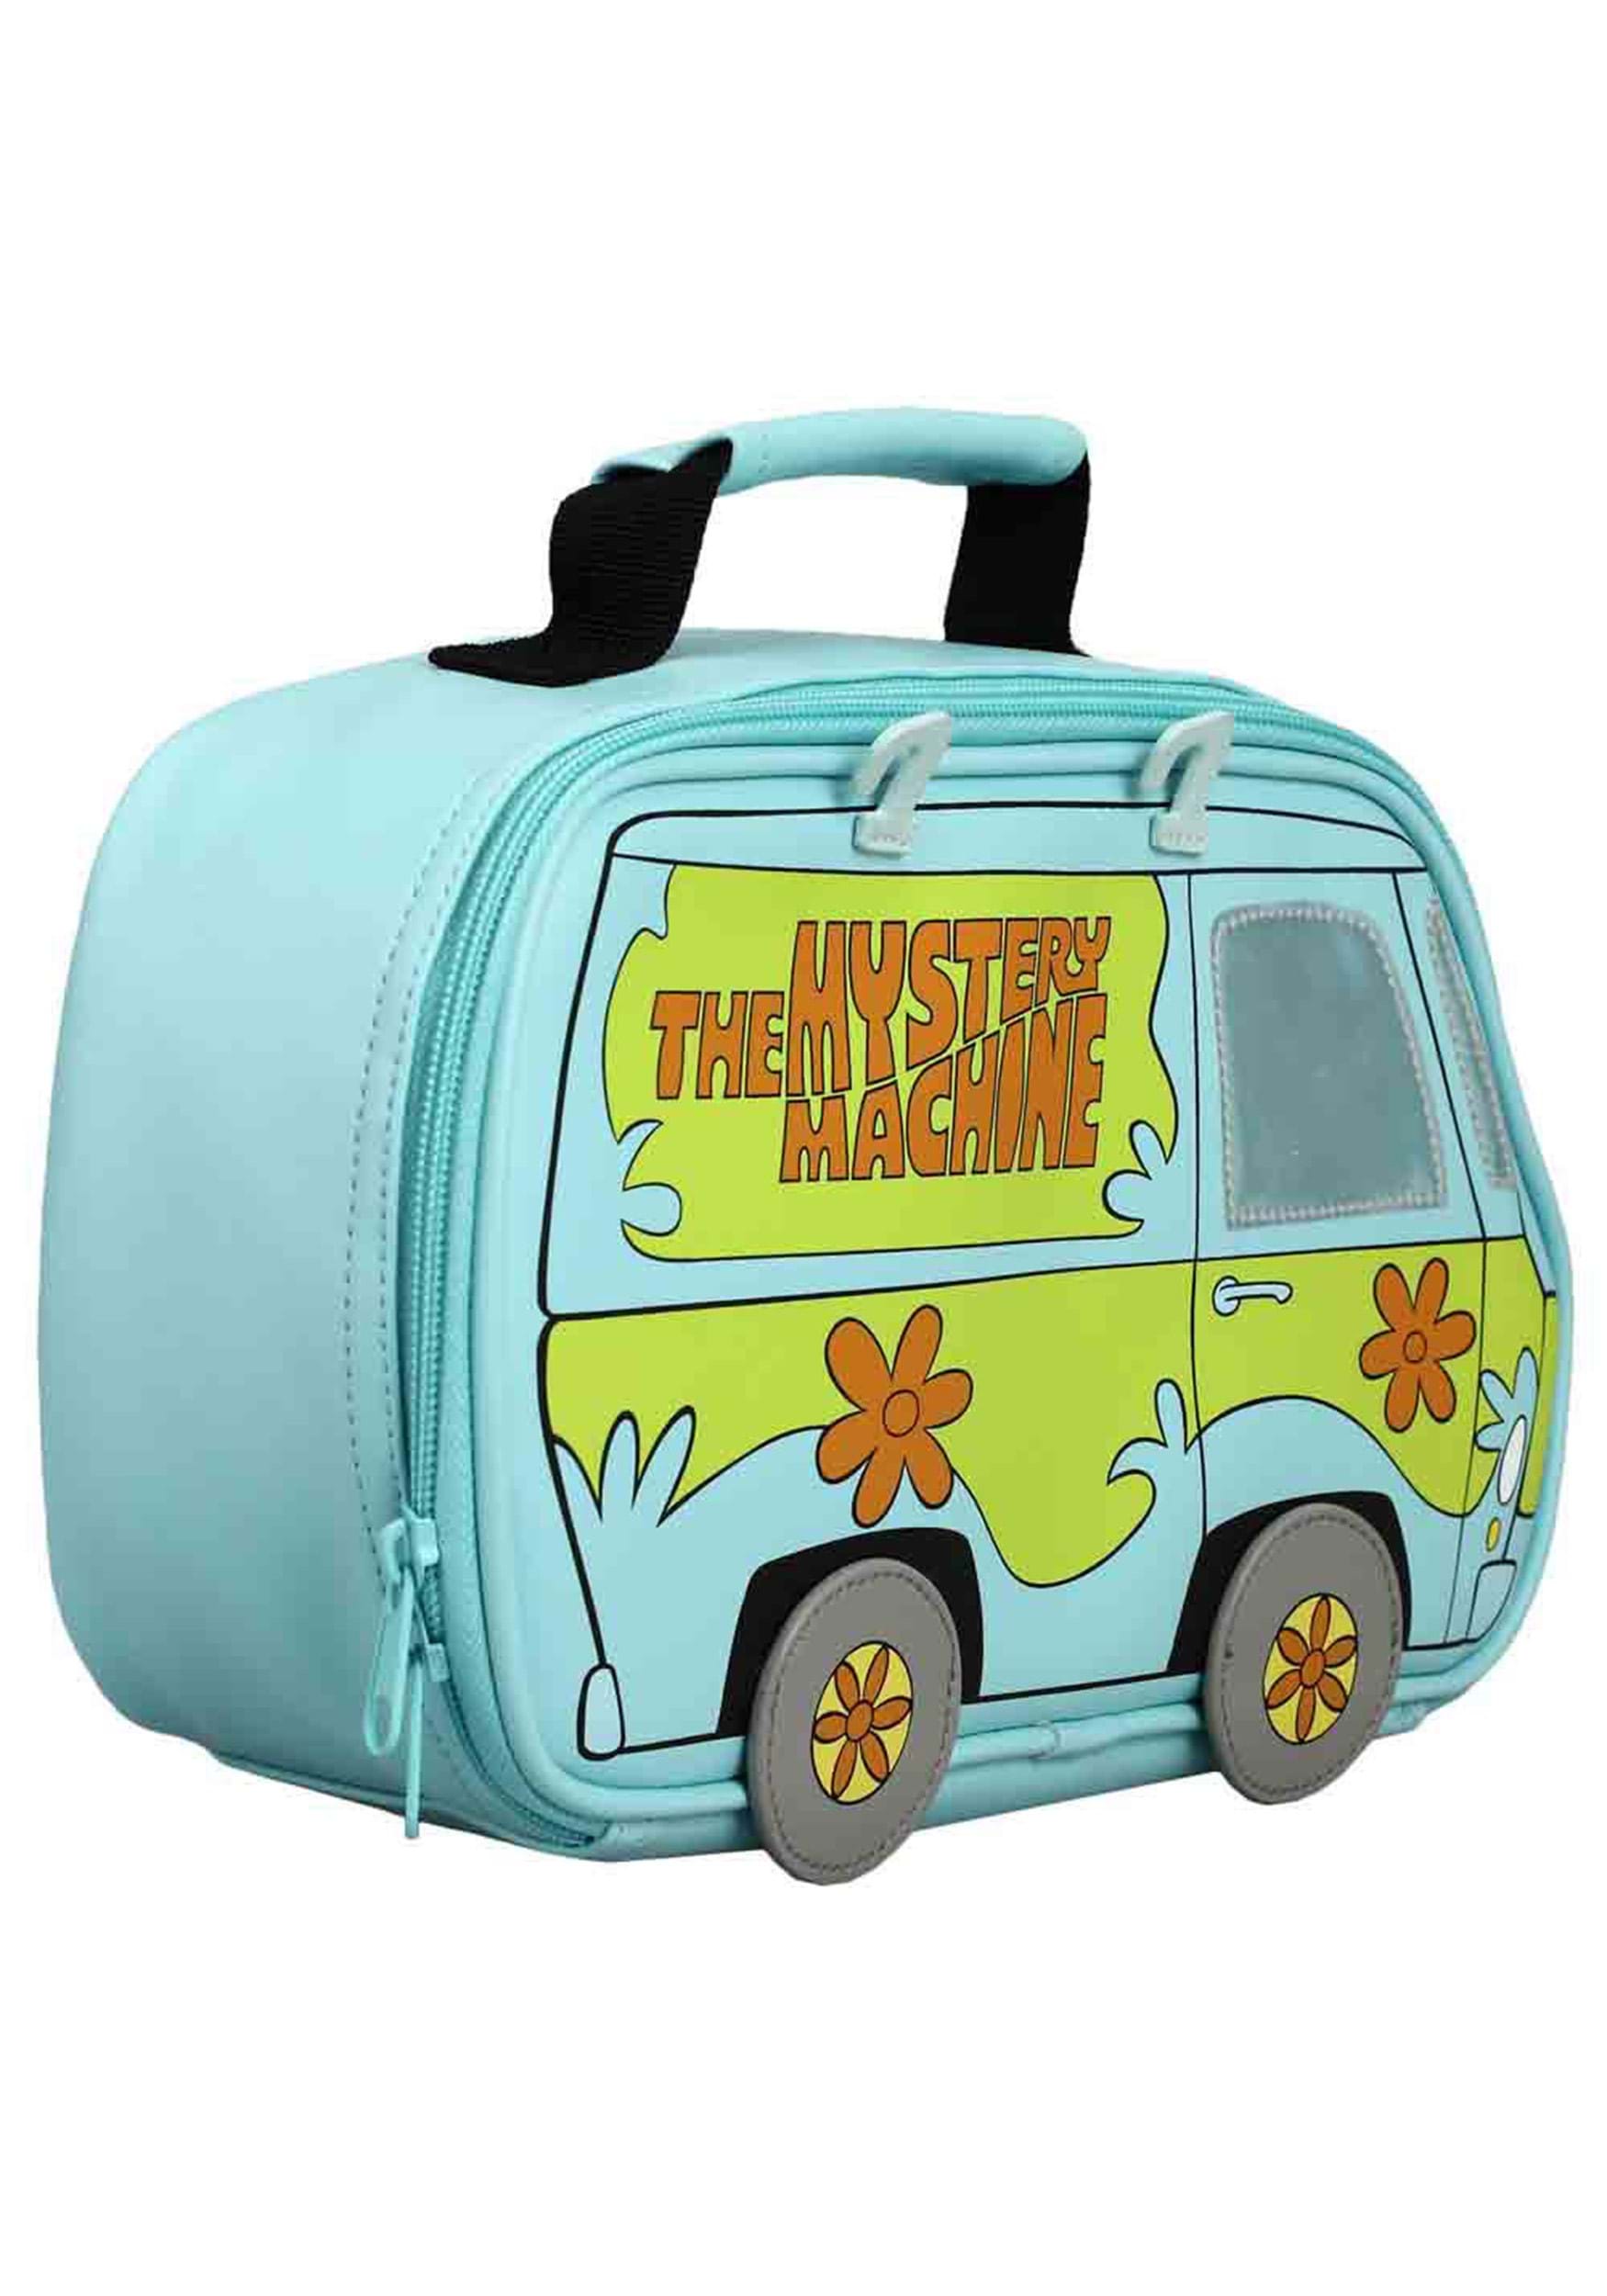 https://images.fun.com/products/77784/2-1-193996/scooby-doo-mystery-machine-die-cut-insulated-lunch-tote-alt-.jpg